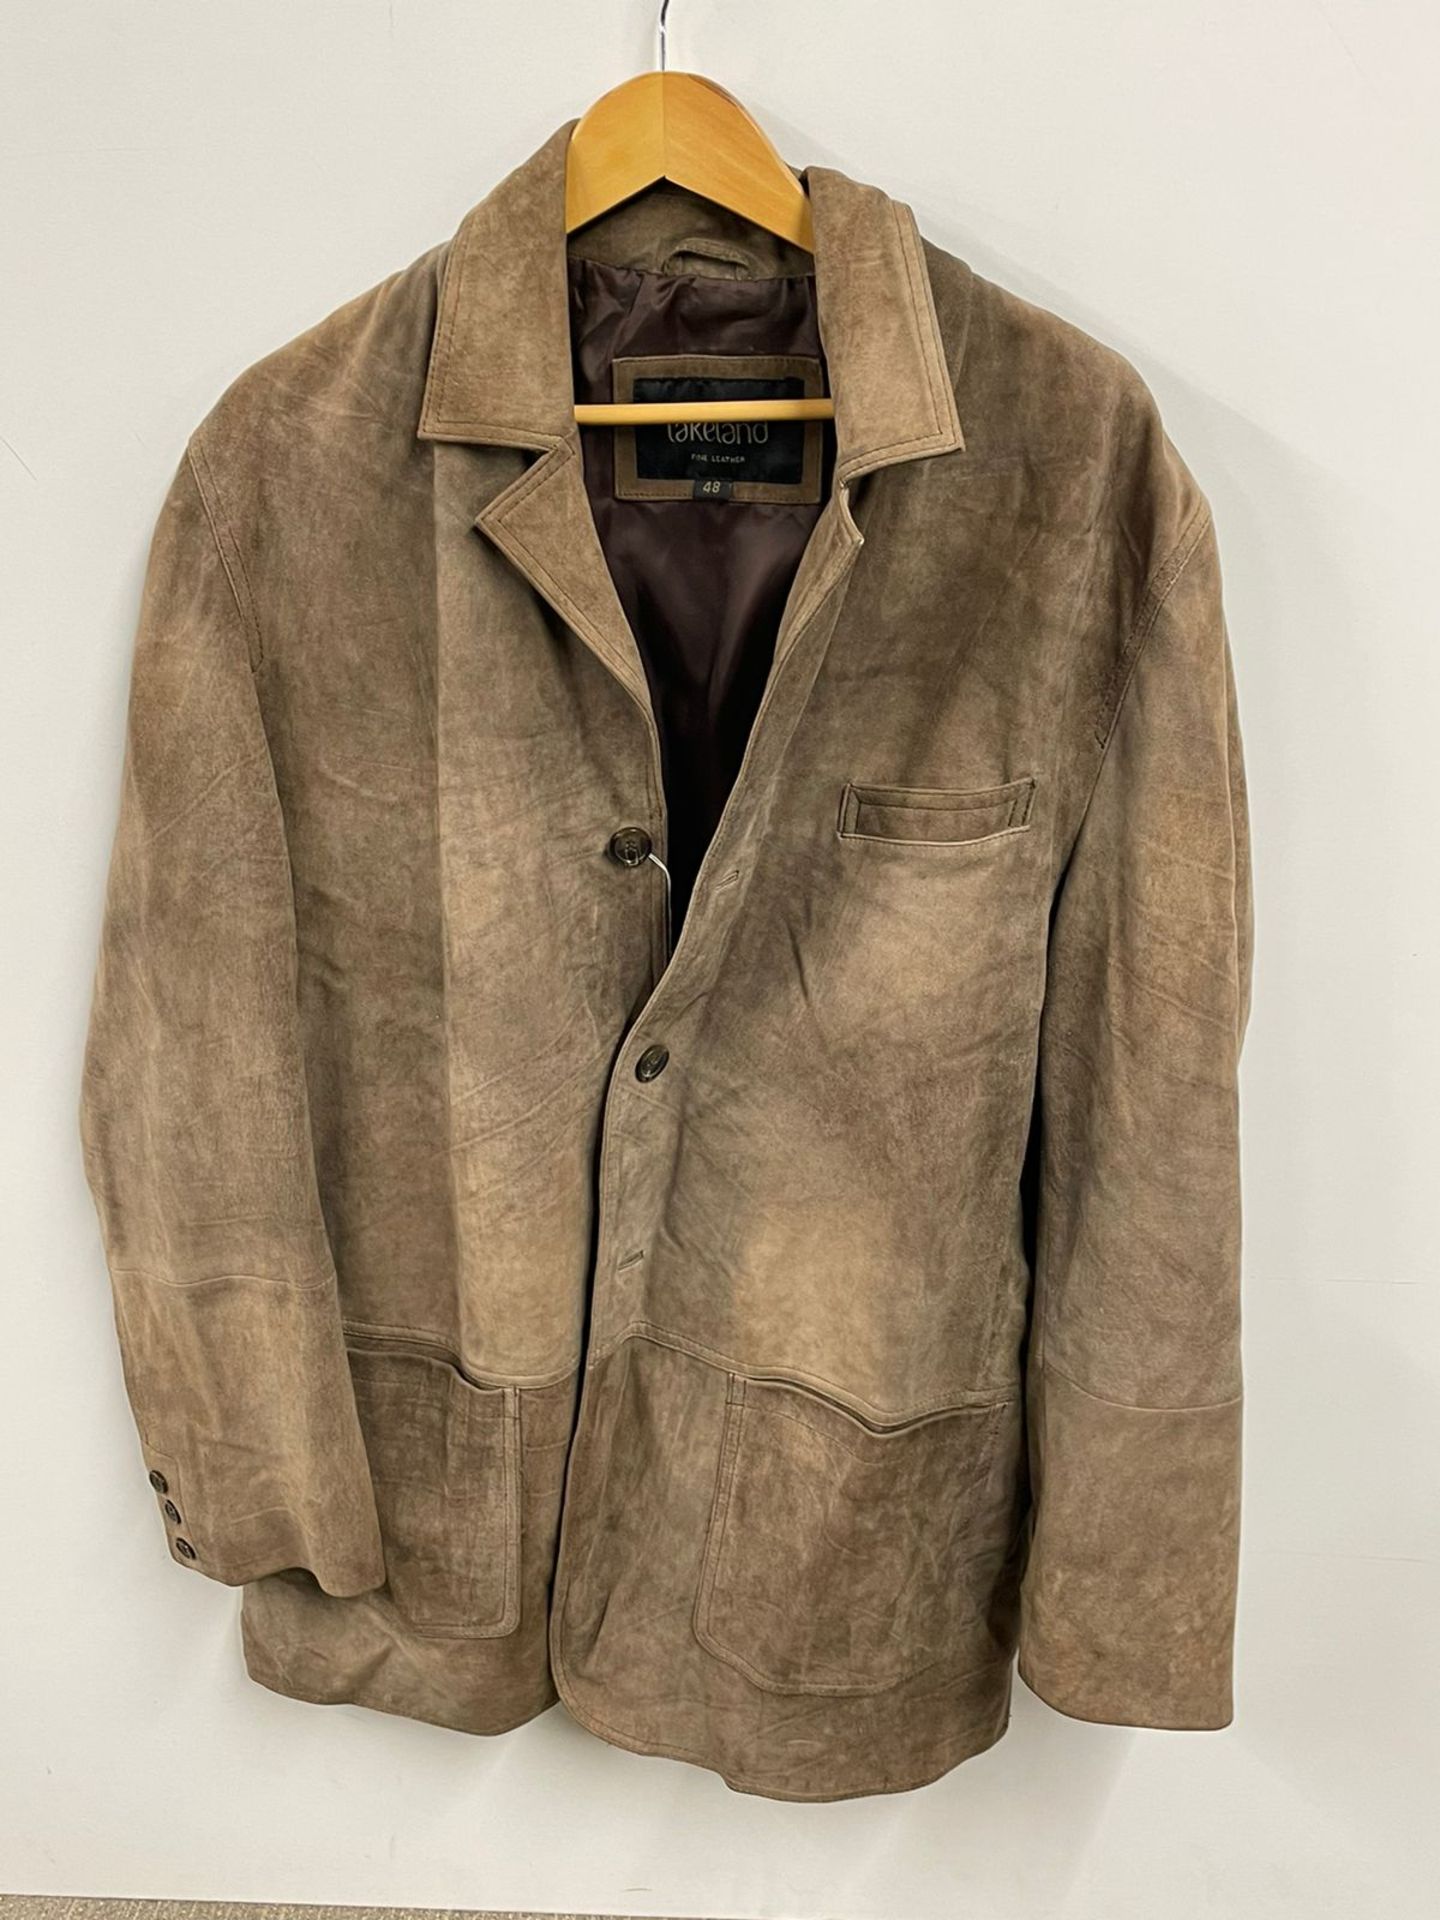 A gent's Lakeland suede leather coat, size 48.